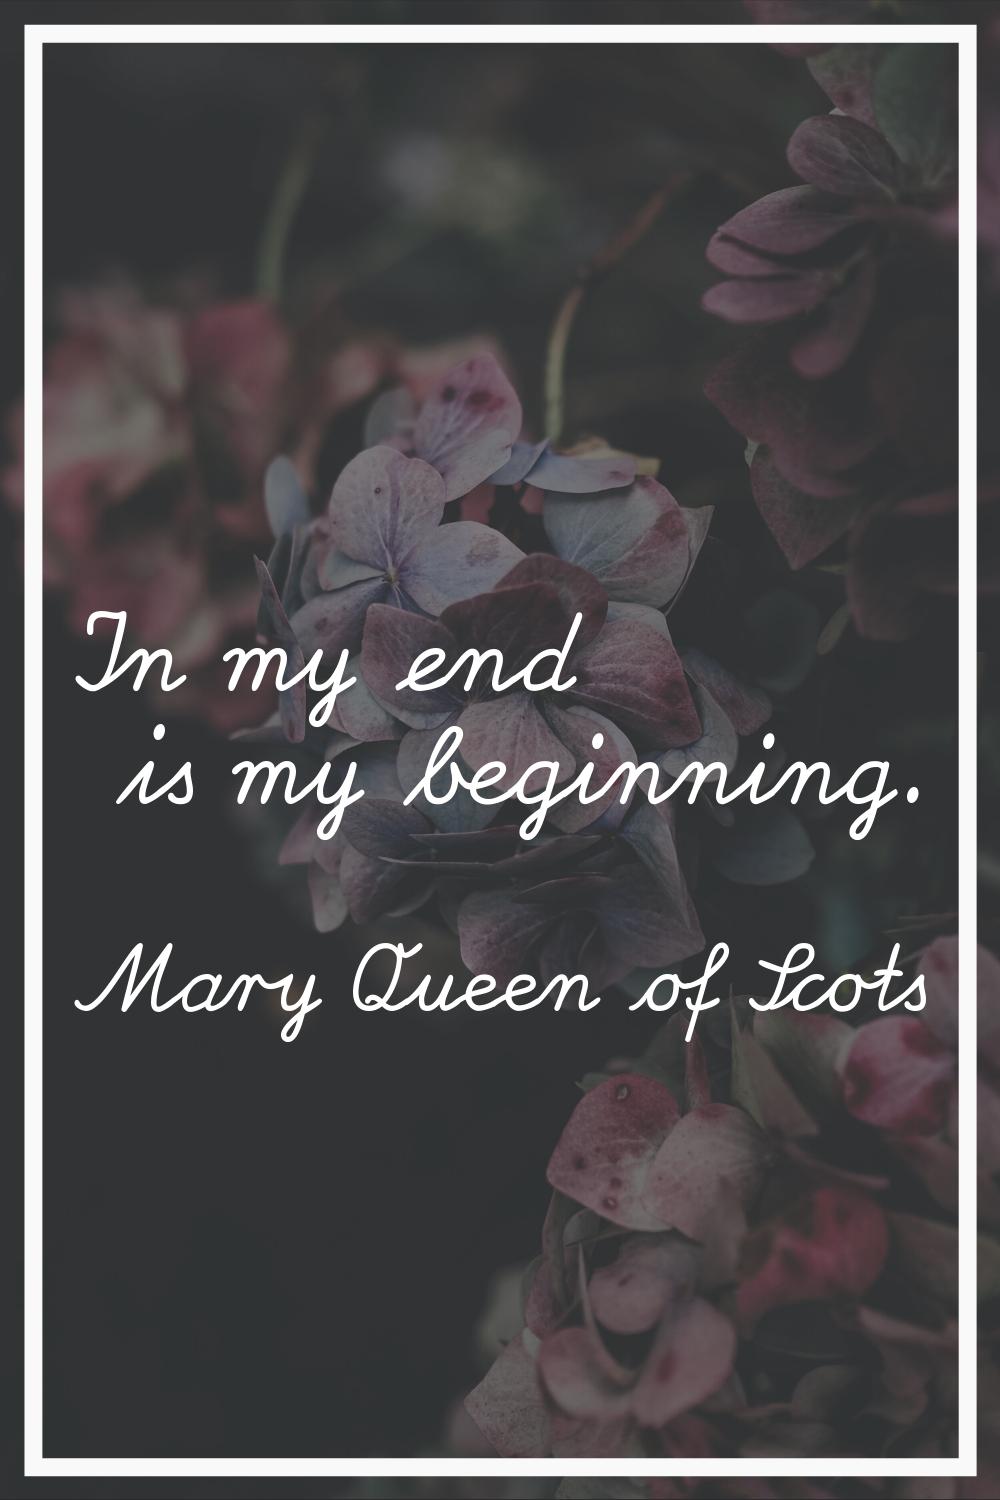 In my end is my beginning.